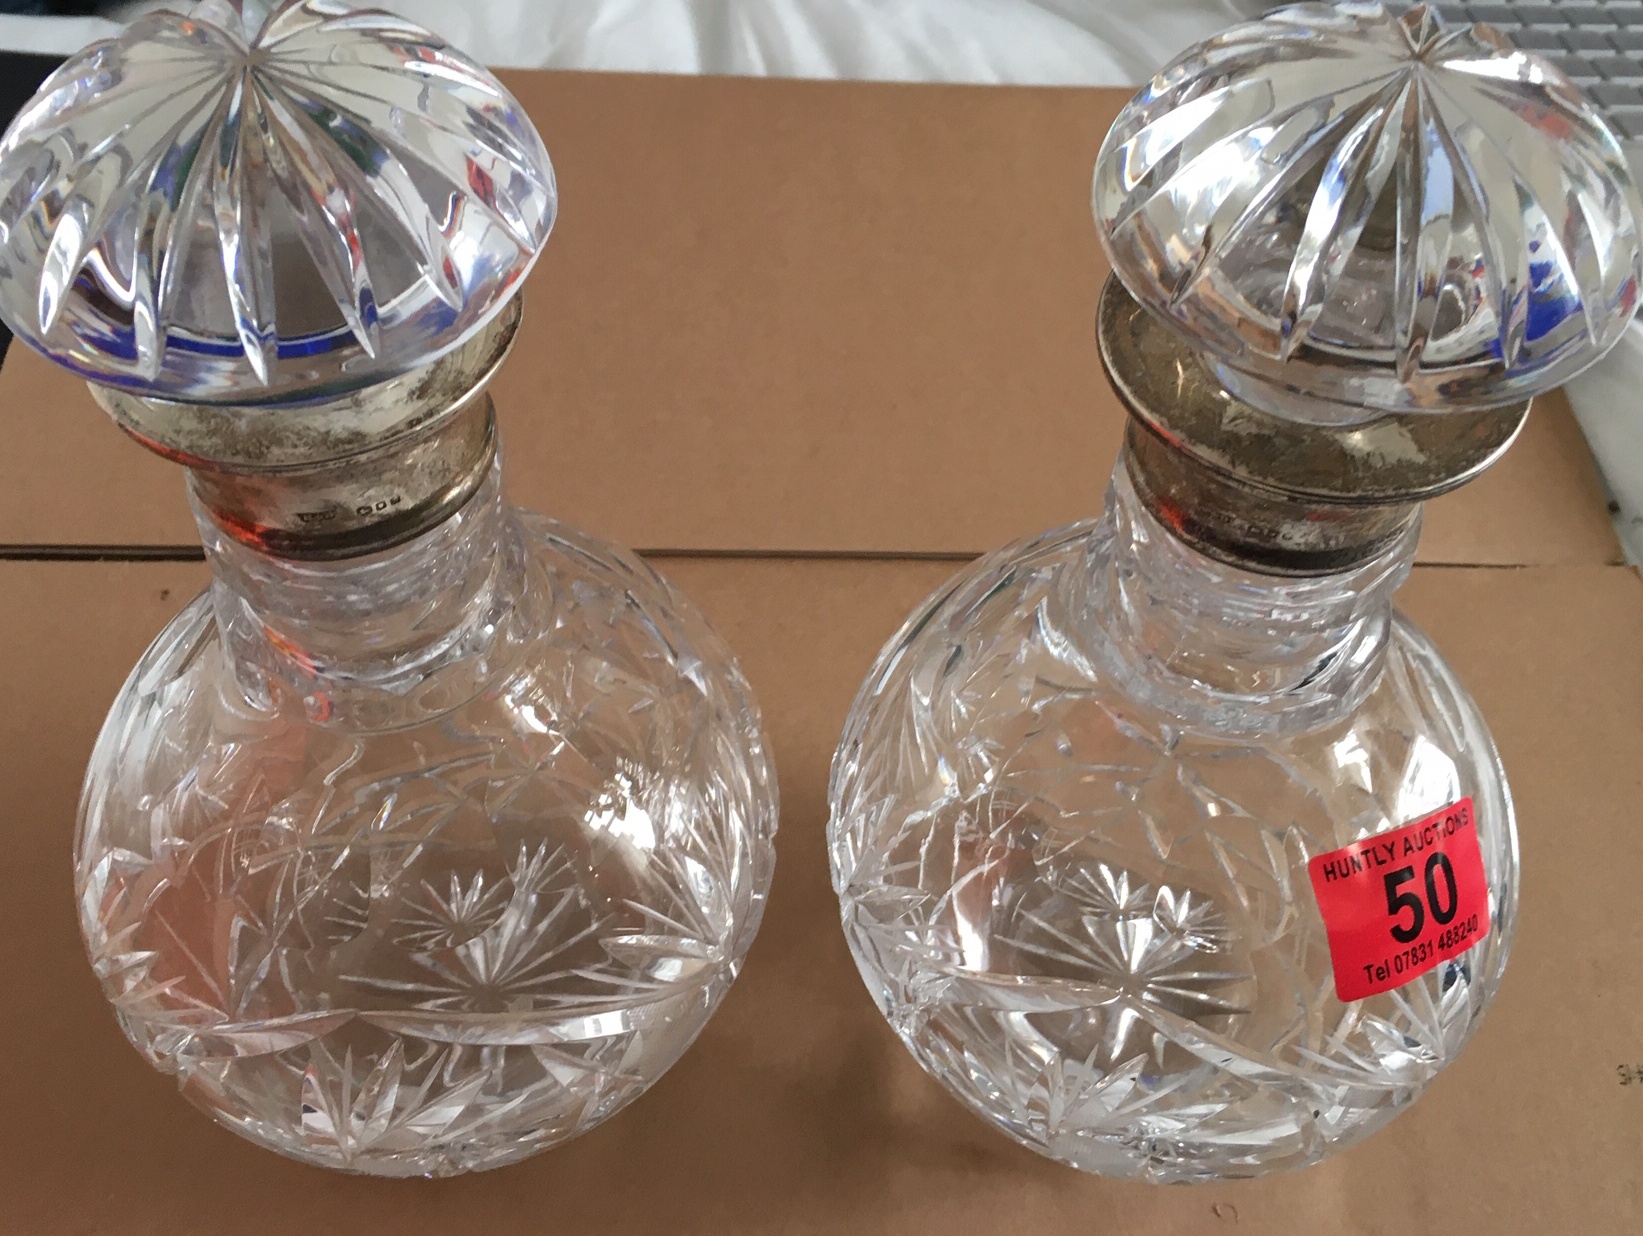 Pair of Vintage Silver Collared Crystal Decanter 9 3/4" tall and 5 1/2" at the widest.